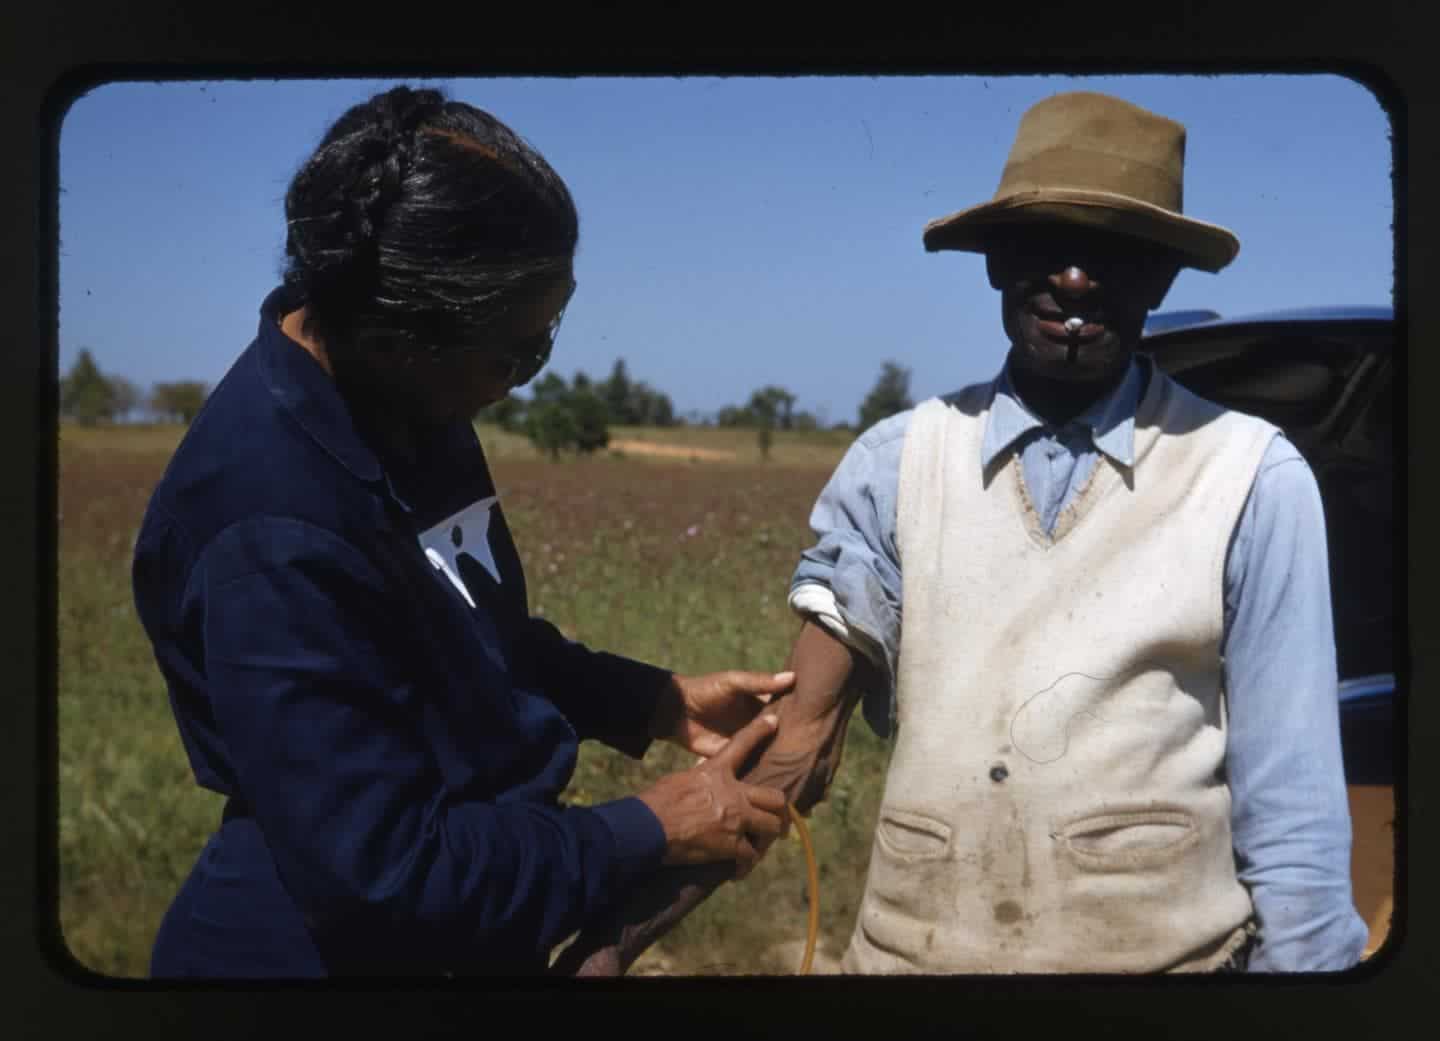 20 Photos from the Tuskegee Syphilis Study1440 x 1041